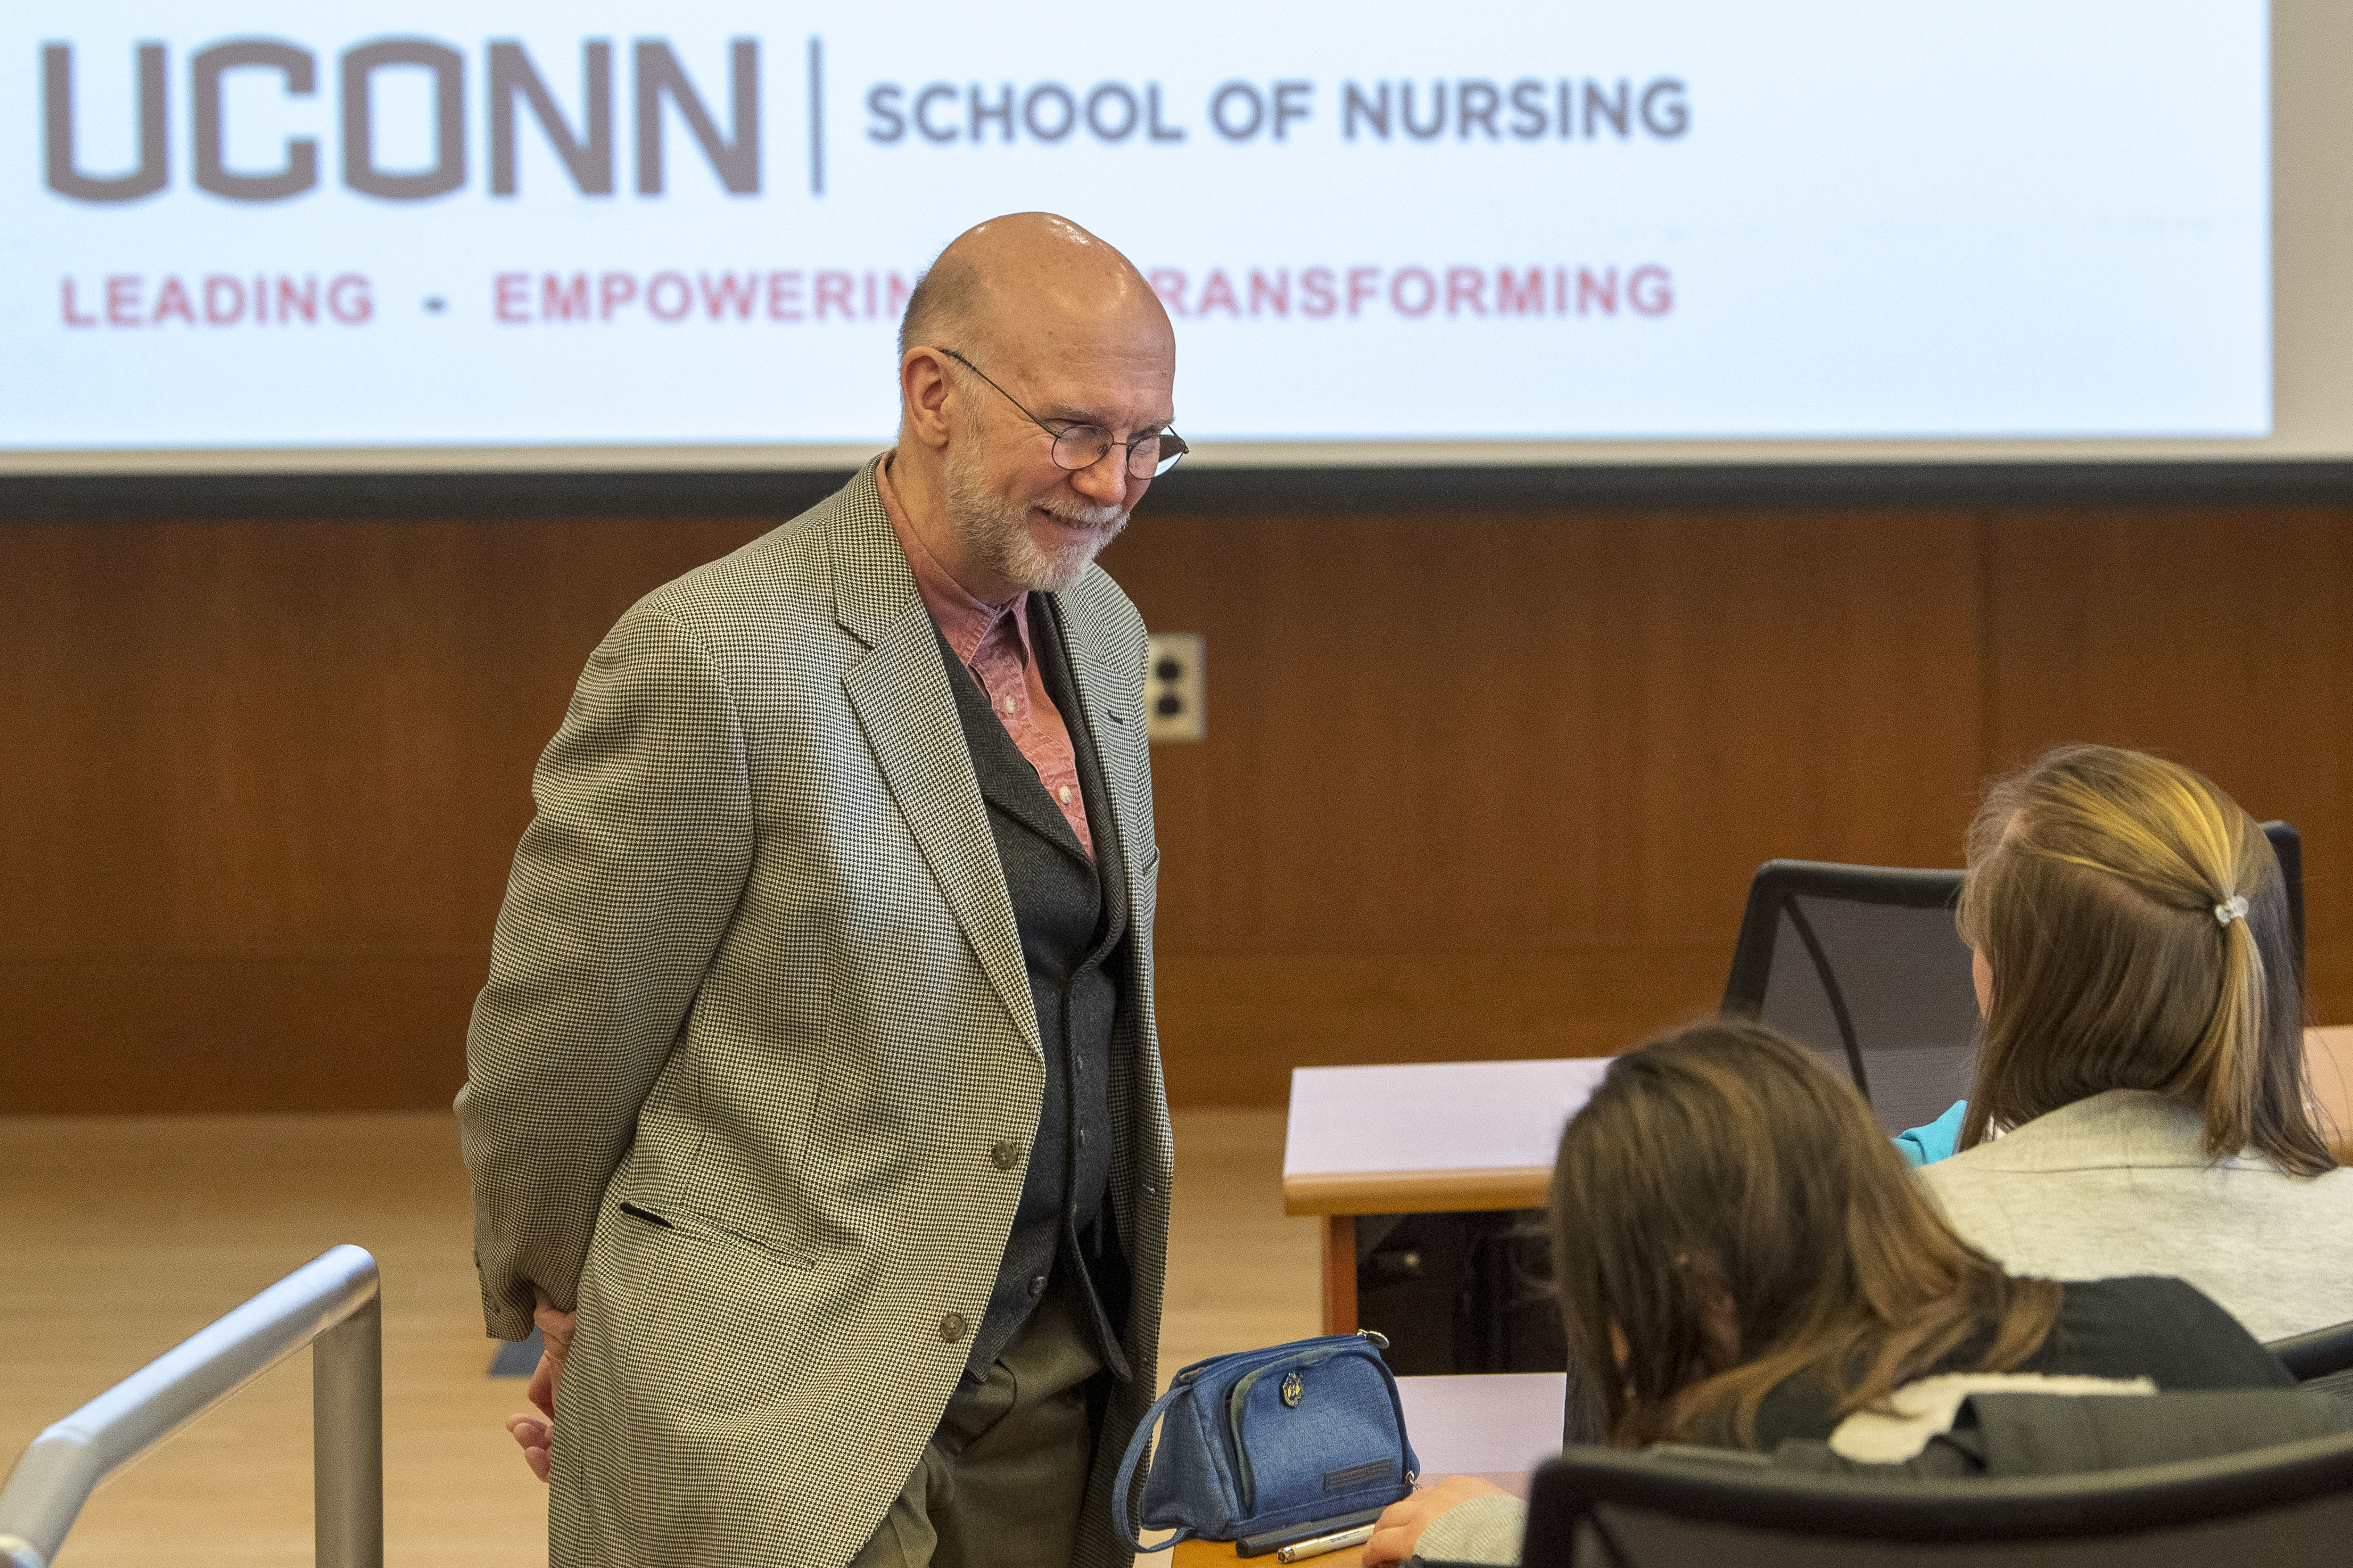 Professor Thomas Long gives a lecture in the Widmer Wing of the School of Nursing on Feb. 4, 2019.